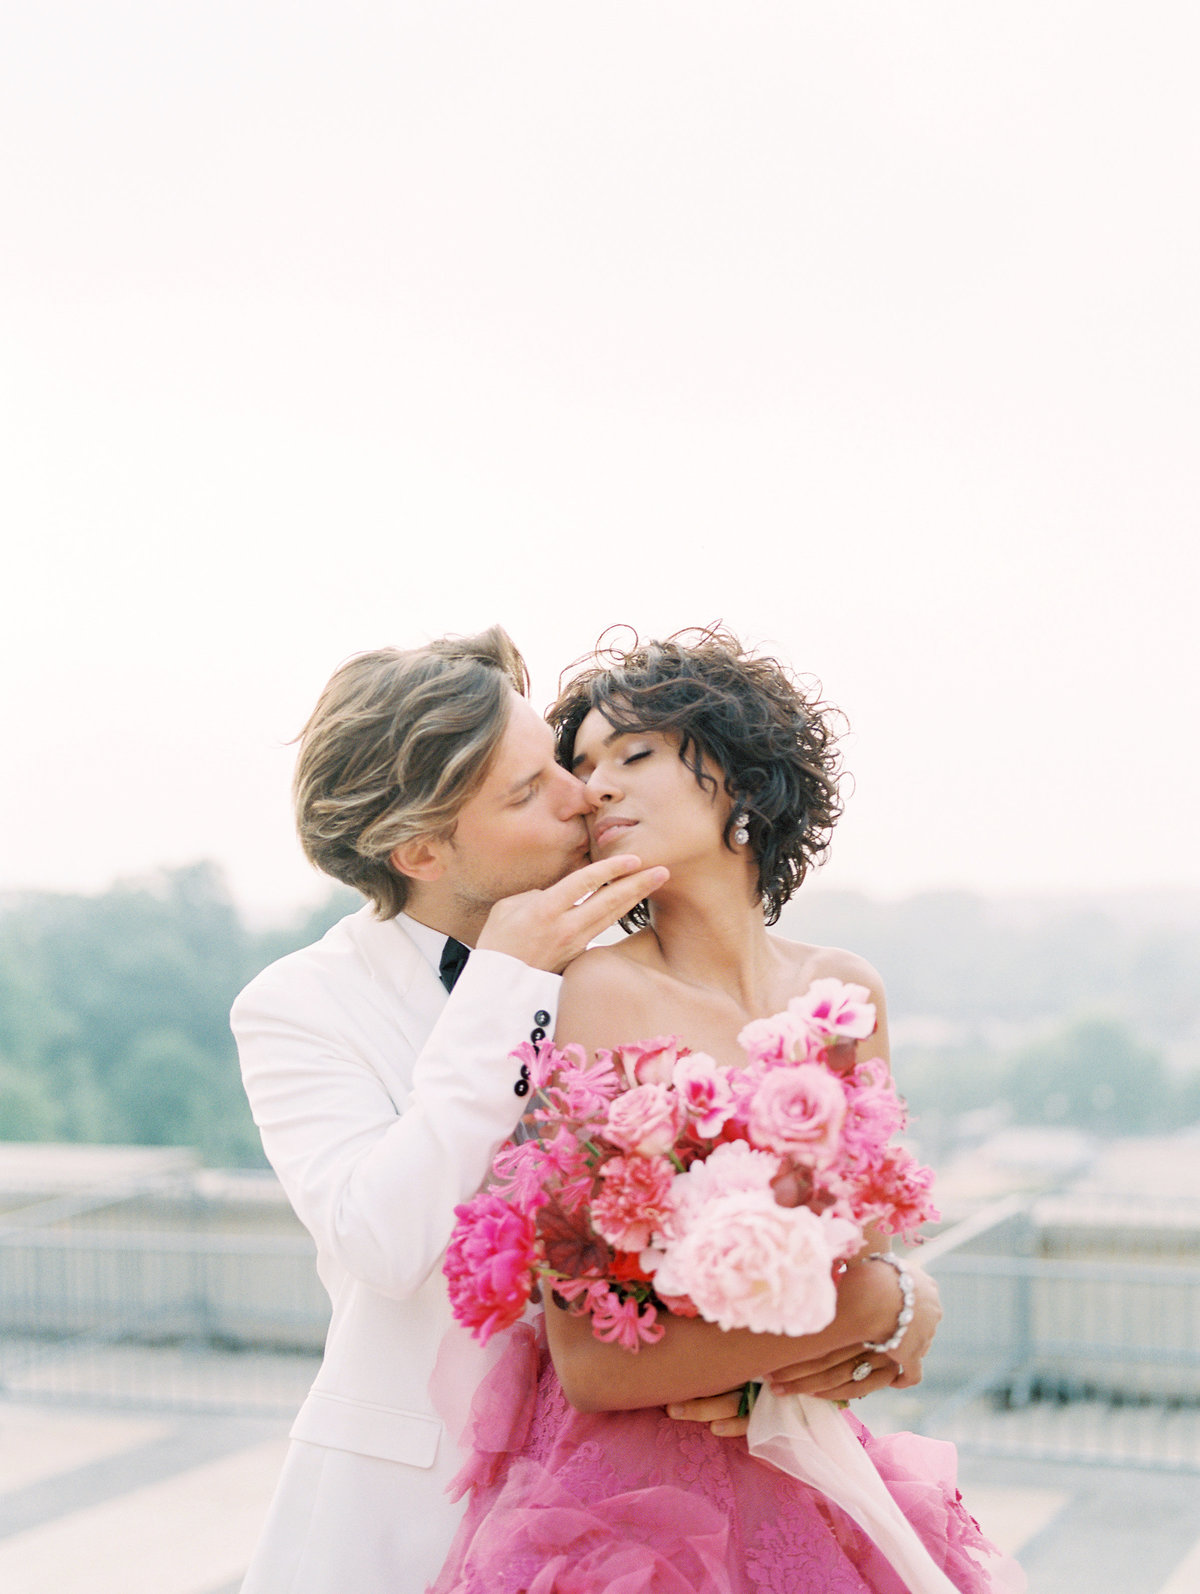 Elopement in Paris France - Marchesa Gown with Pink florals